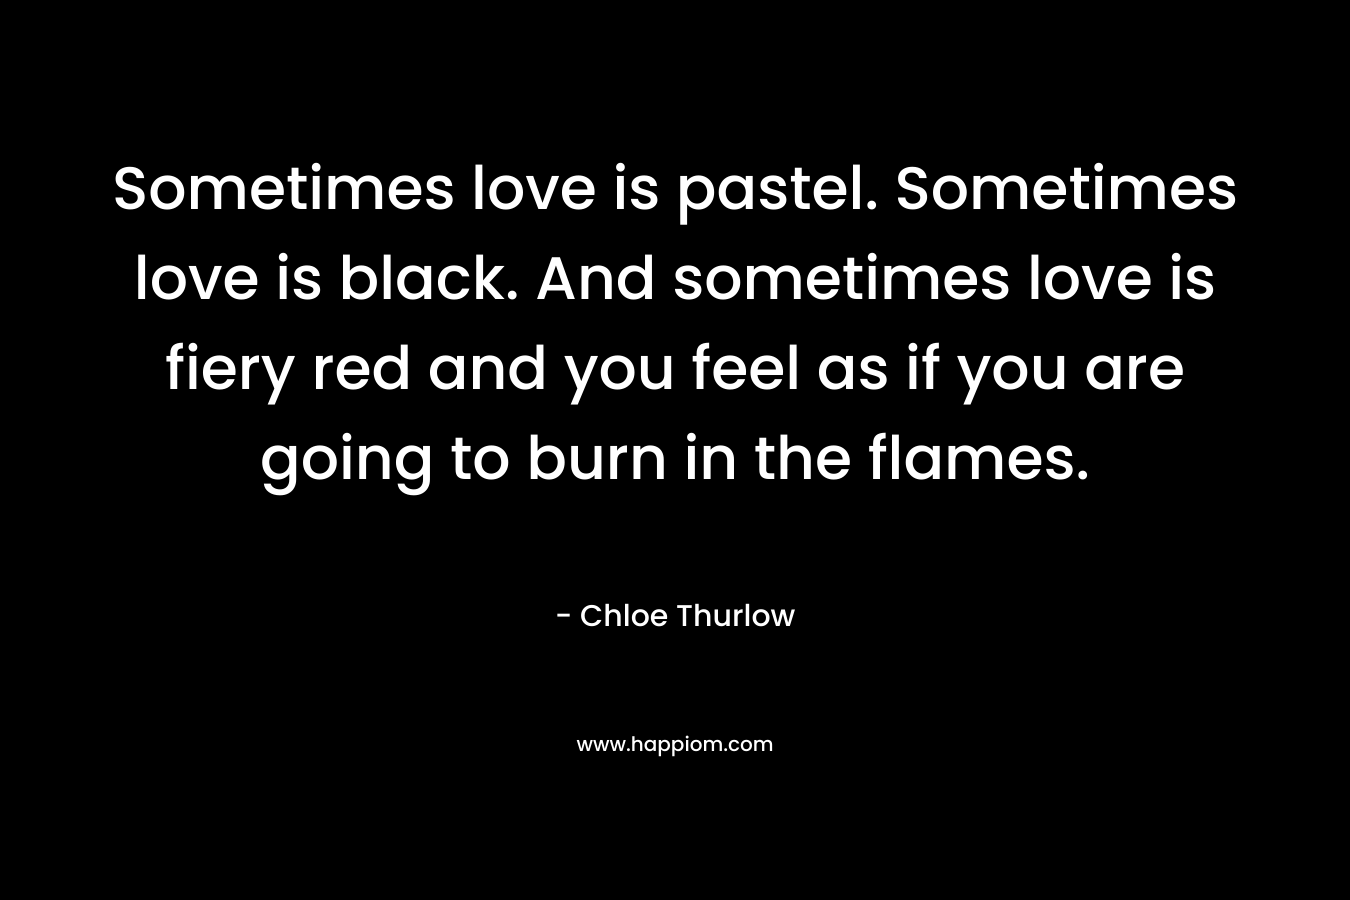 Sometimes love is pastel. Sometimes love is black. And sometimes love is fiery red and you feel as if you are going to burn in the flames. – Chloe Thurlow